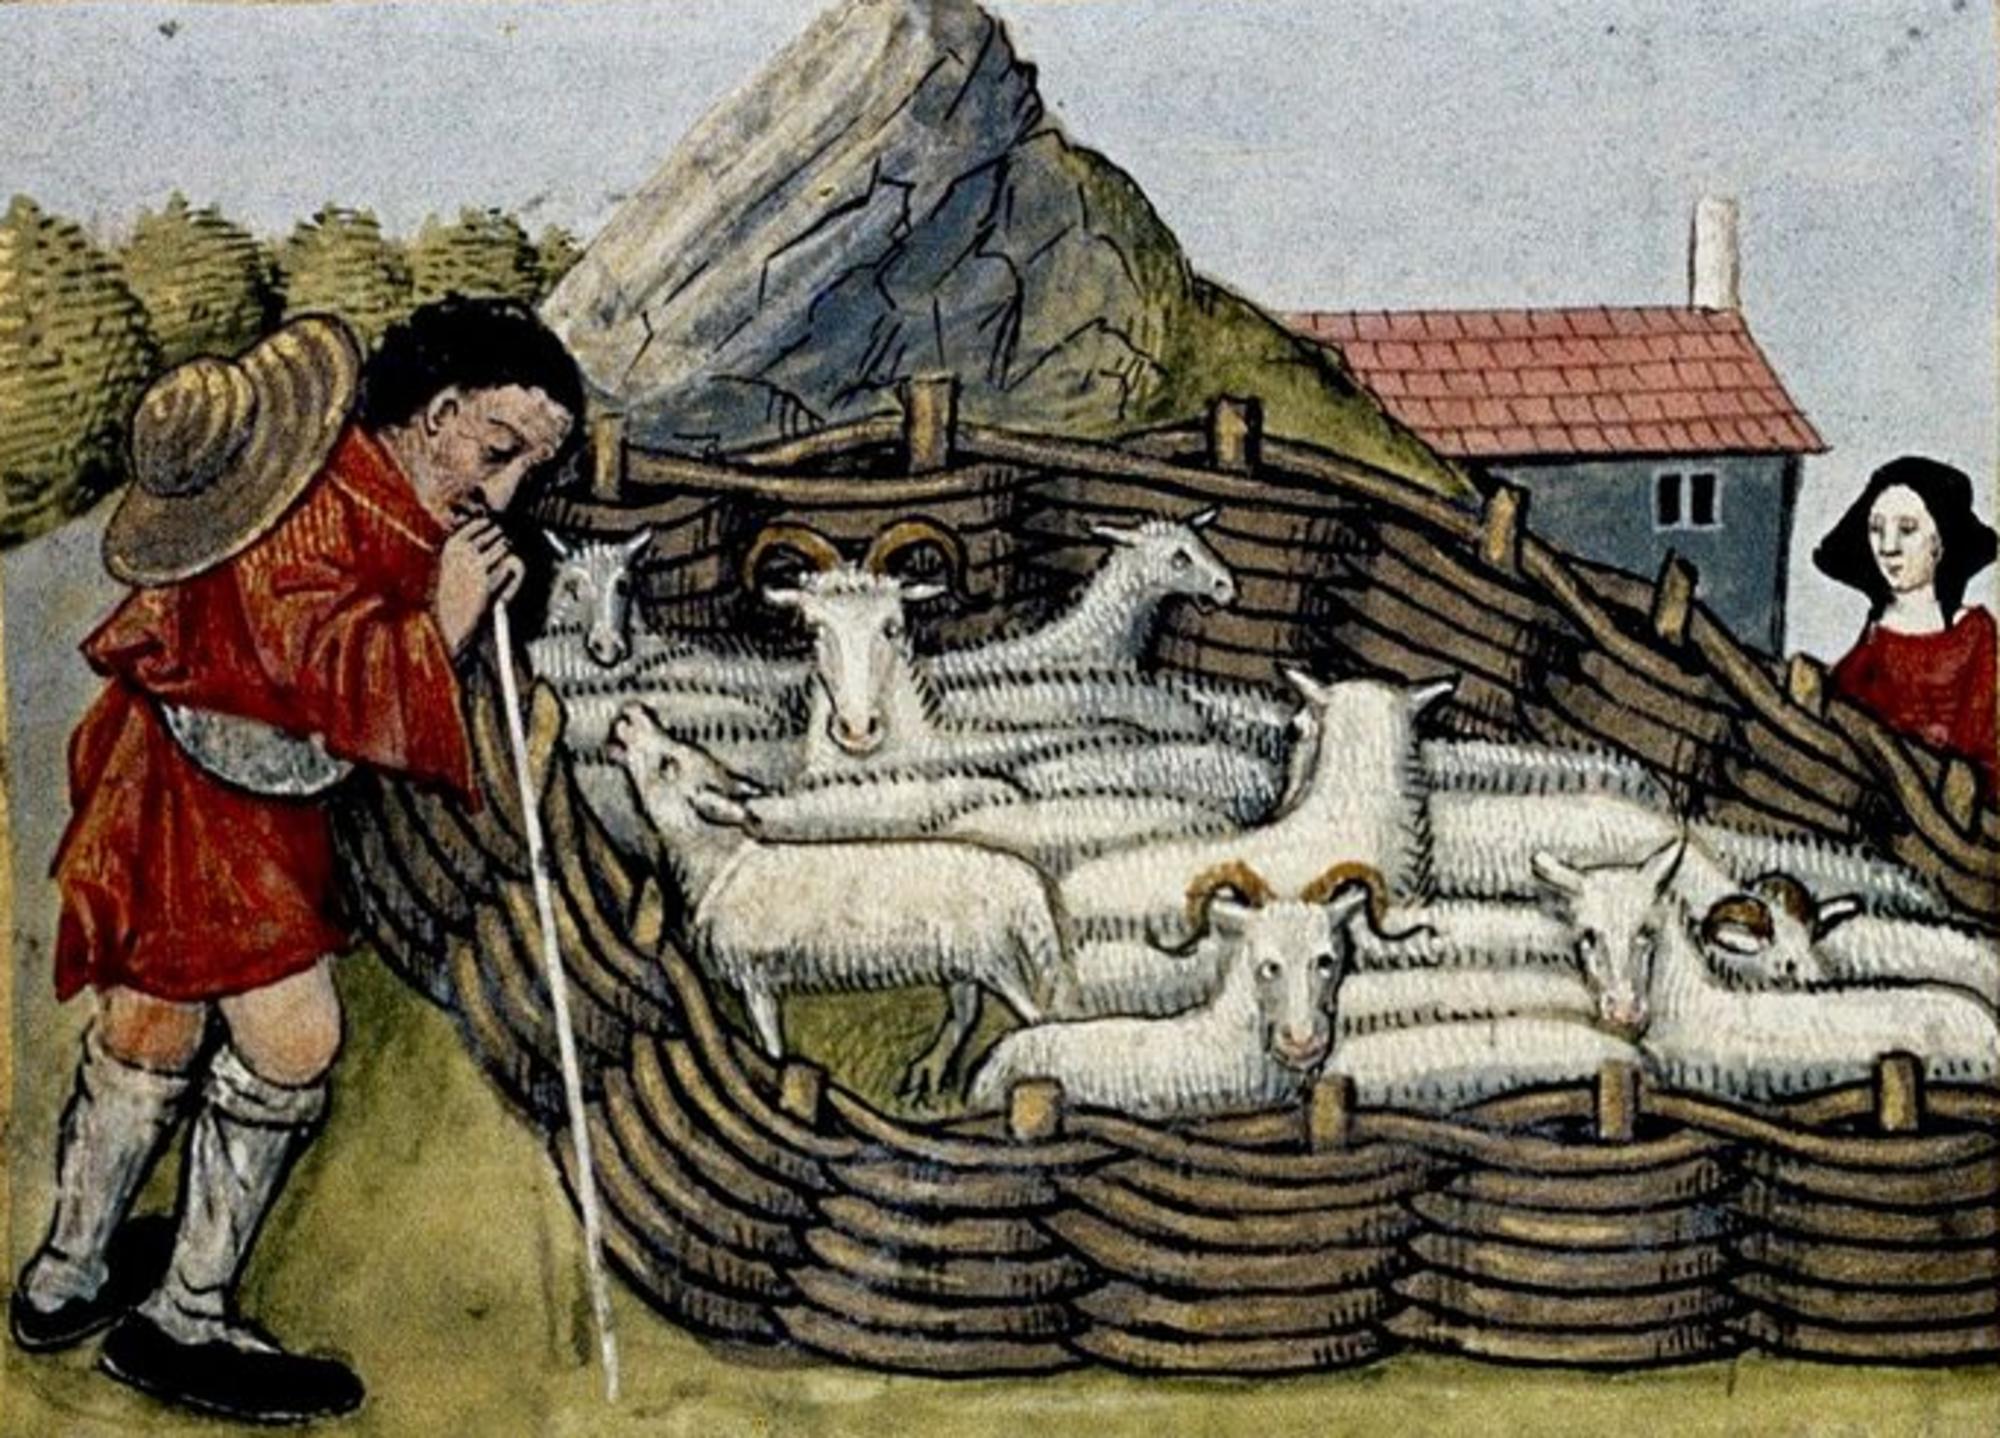 Print of sheep in woven hurdle pen. Medieval France. 15th century.